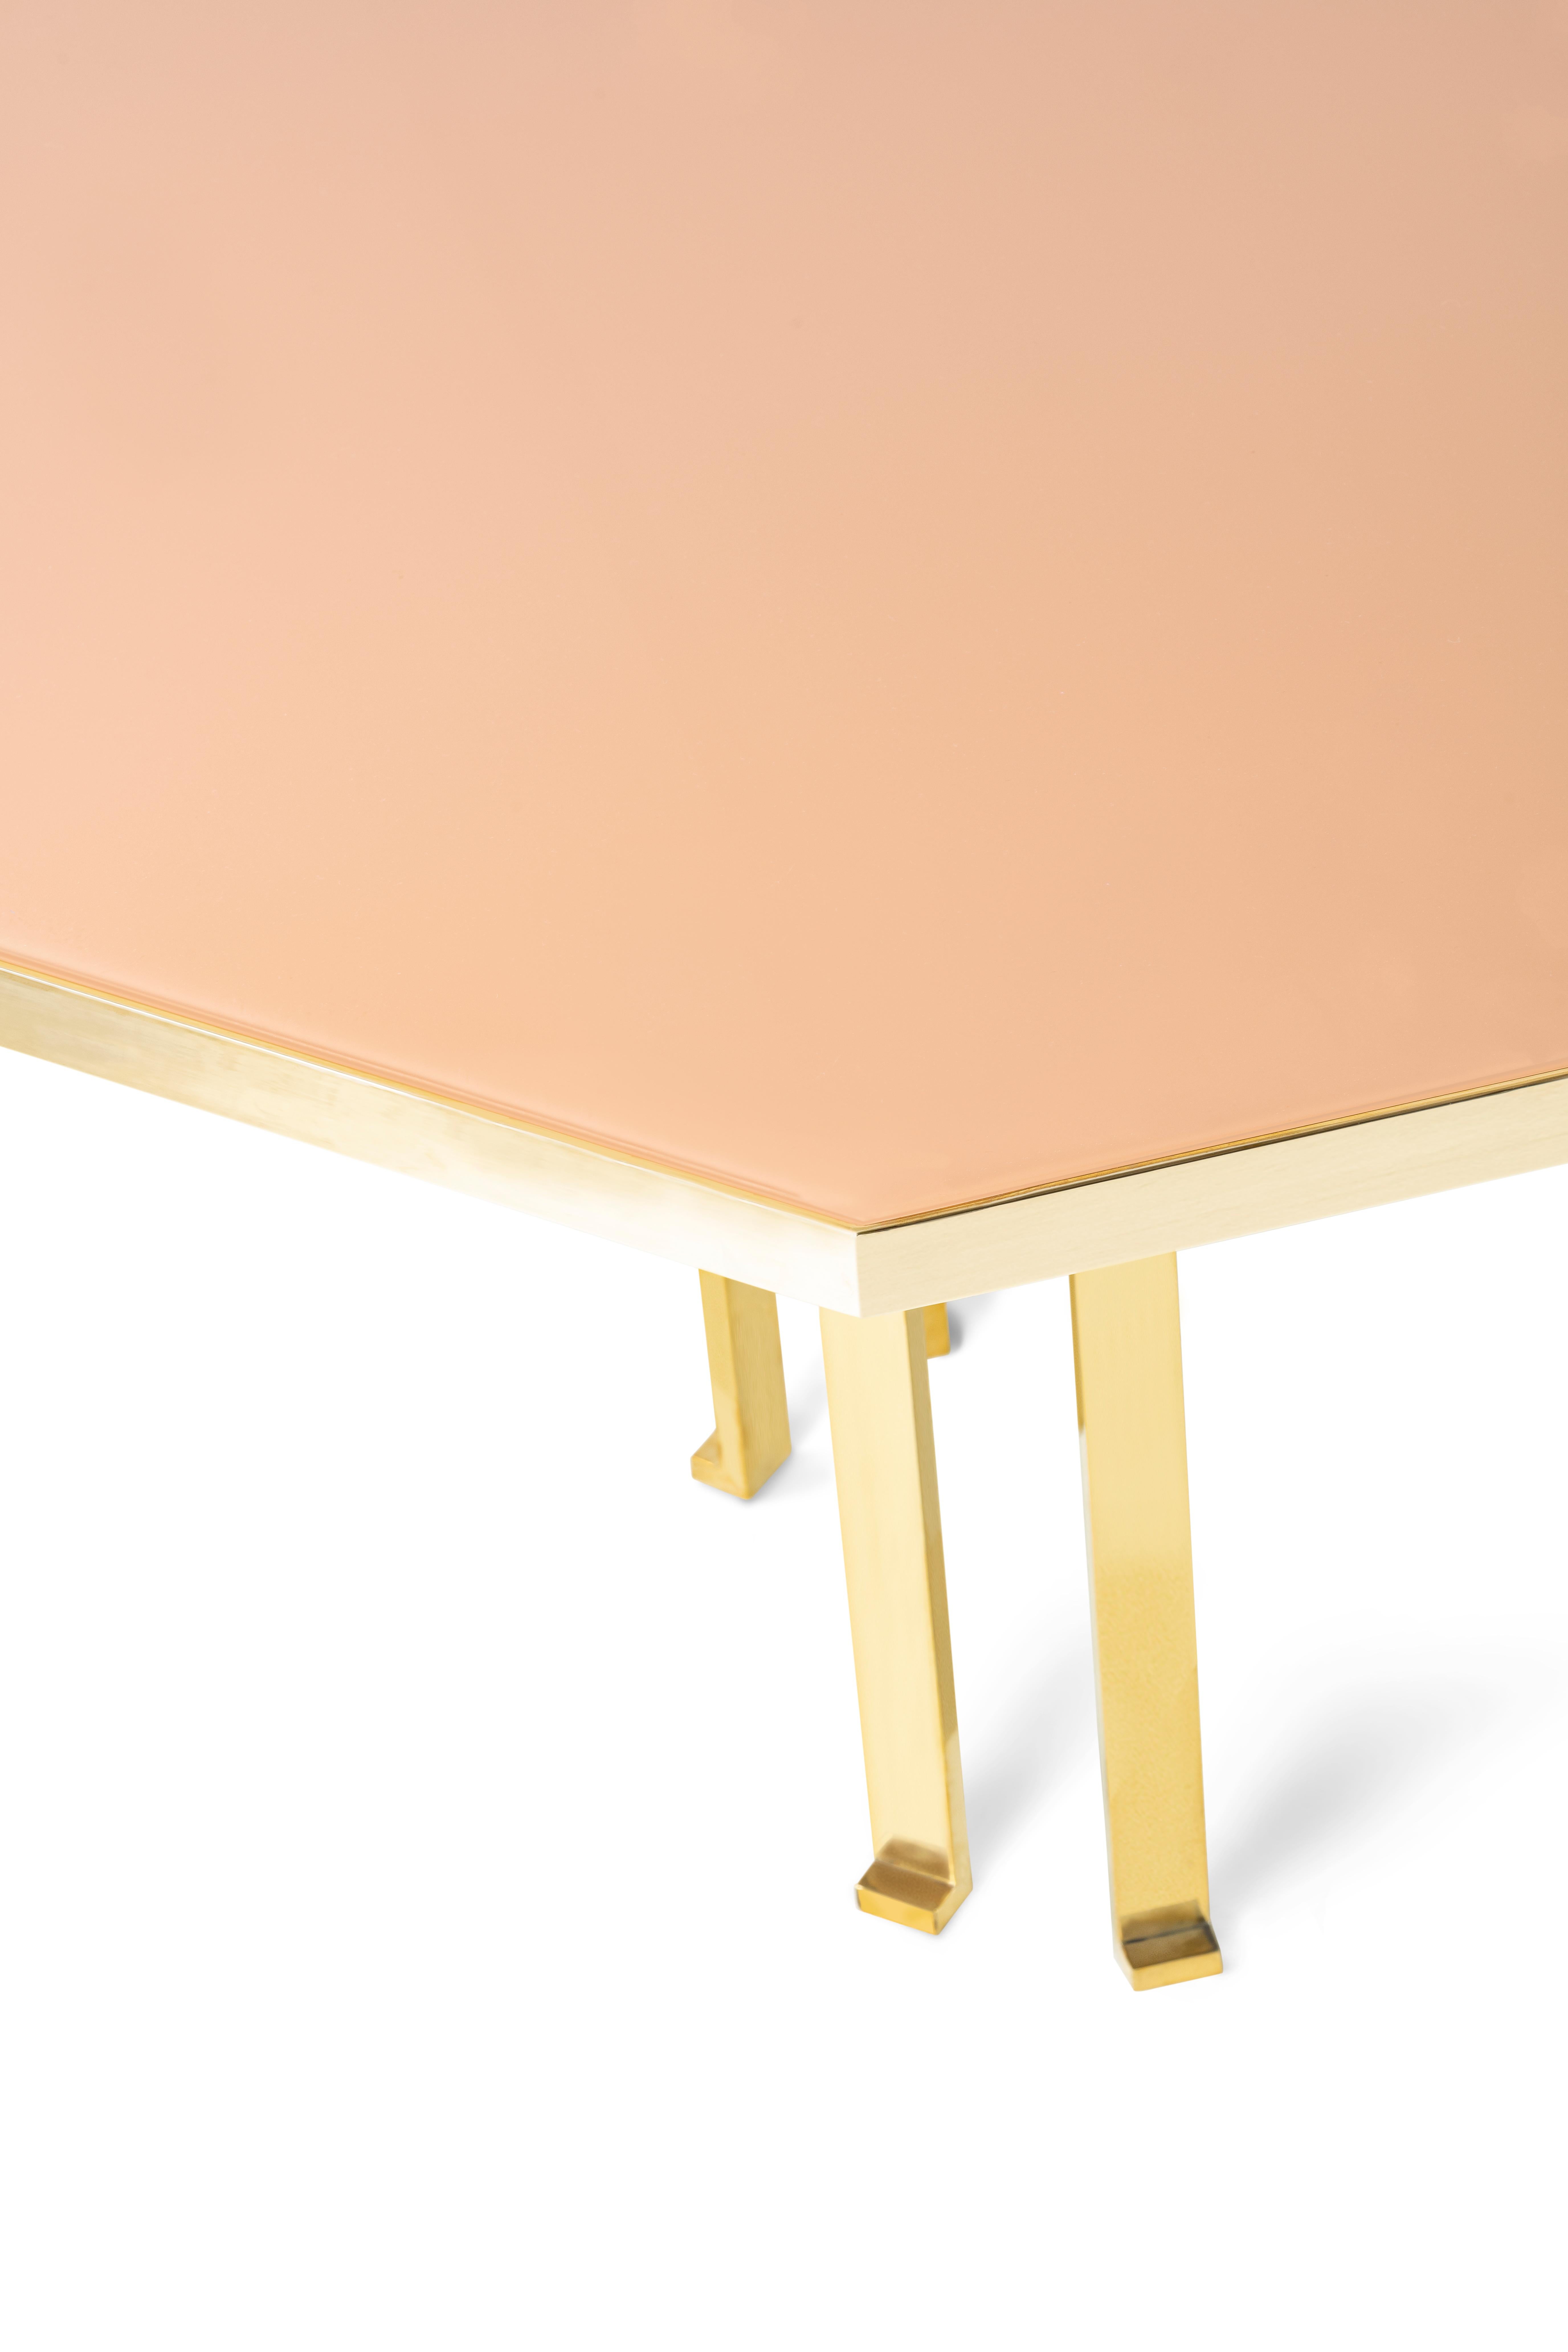 21st Century Filippo Feroldi Brass Table 280 Glass Top Various Colors For Sale 2